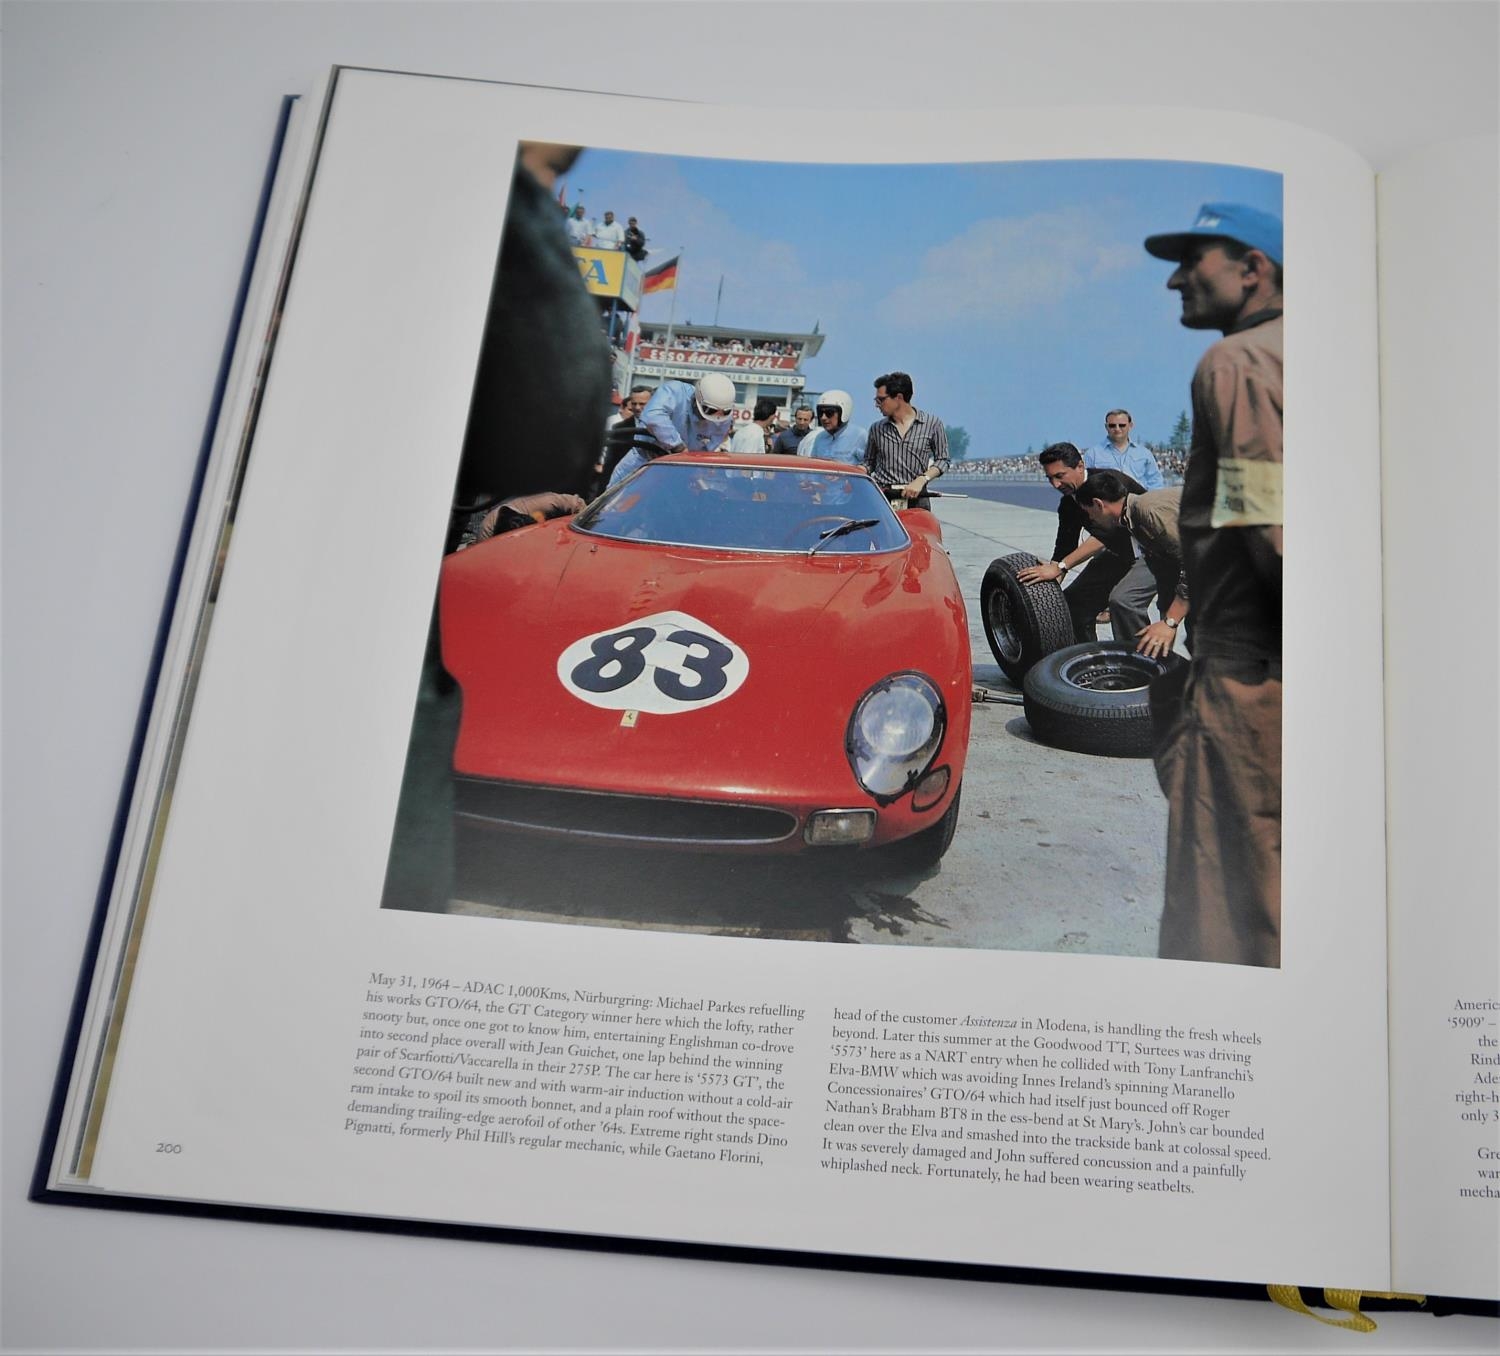 GEOFFREY GODDARD: FERRARI IN CAMERA FROM ASCARI TO VILLENEUVE limited edition copy 36 of 1000 of - Image 3 of 5